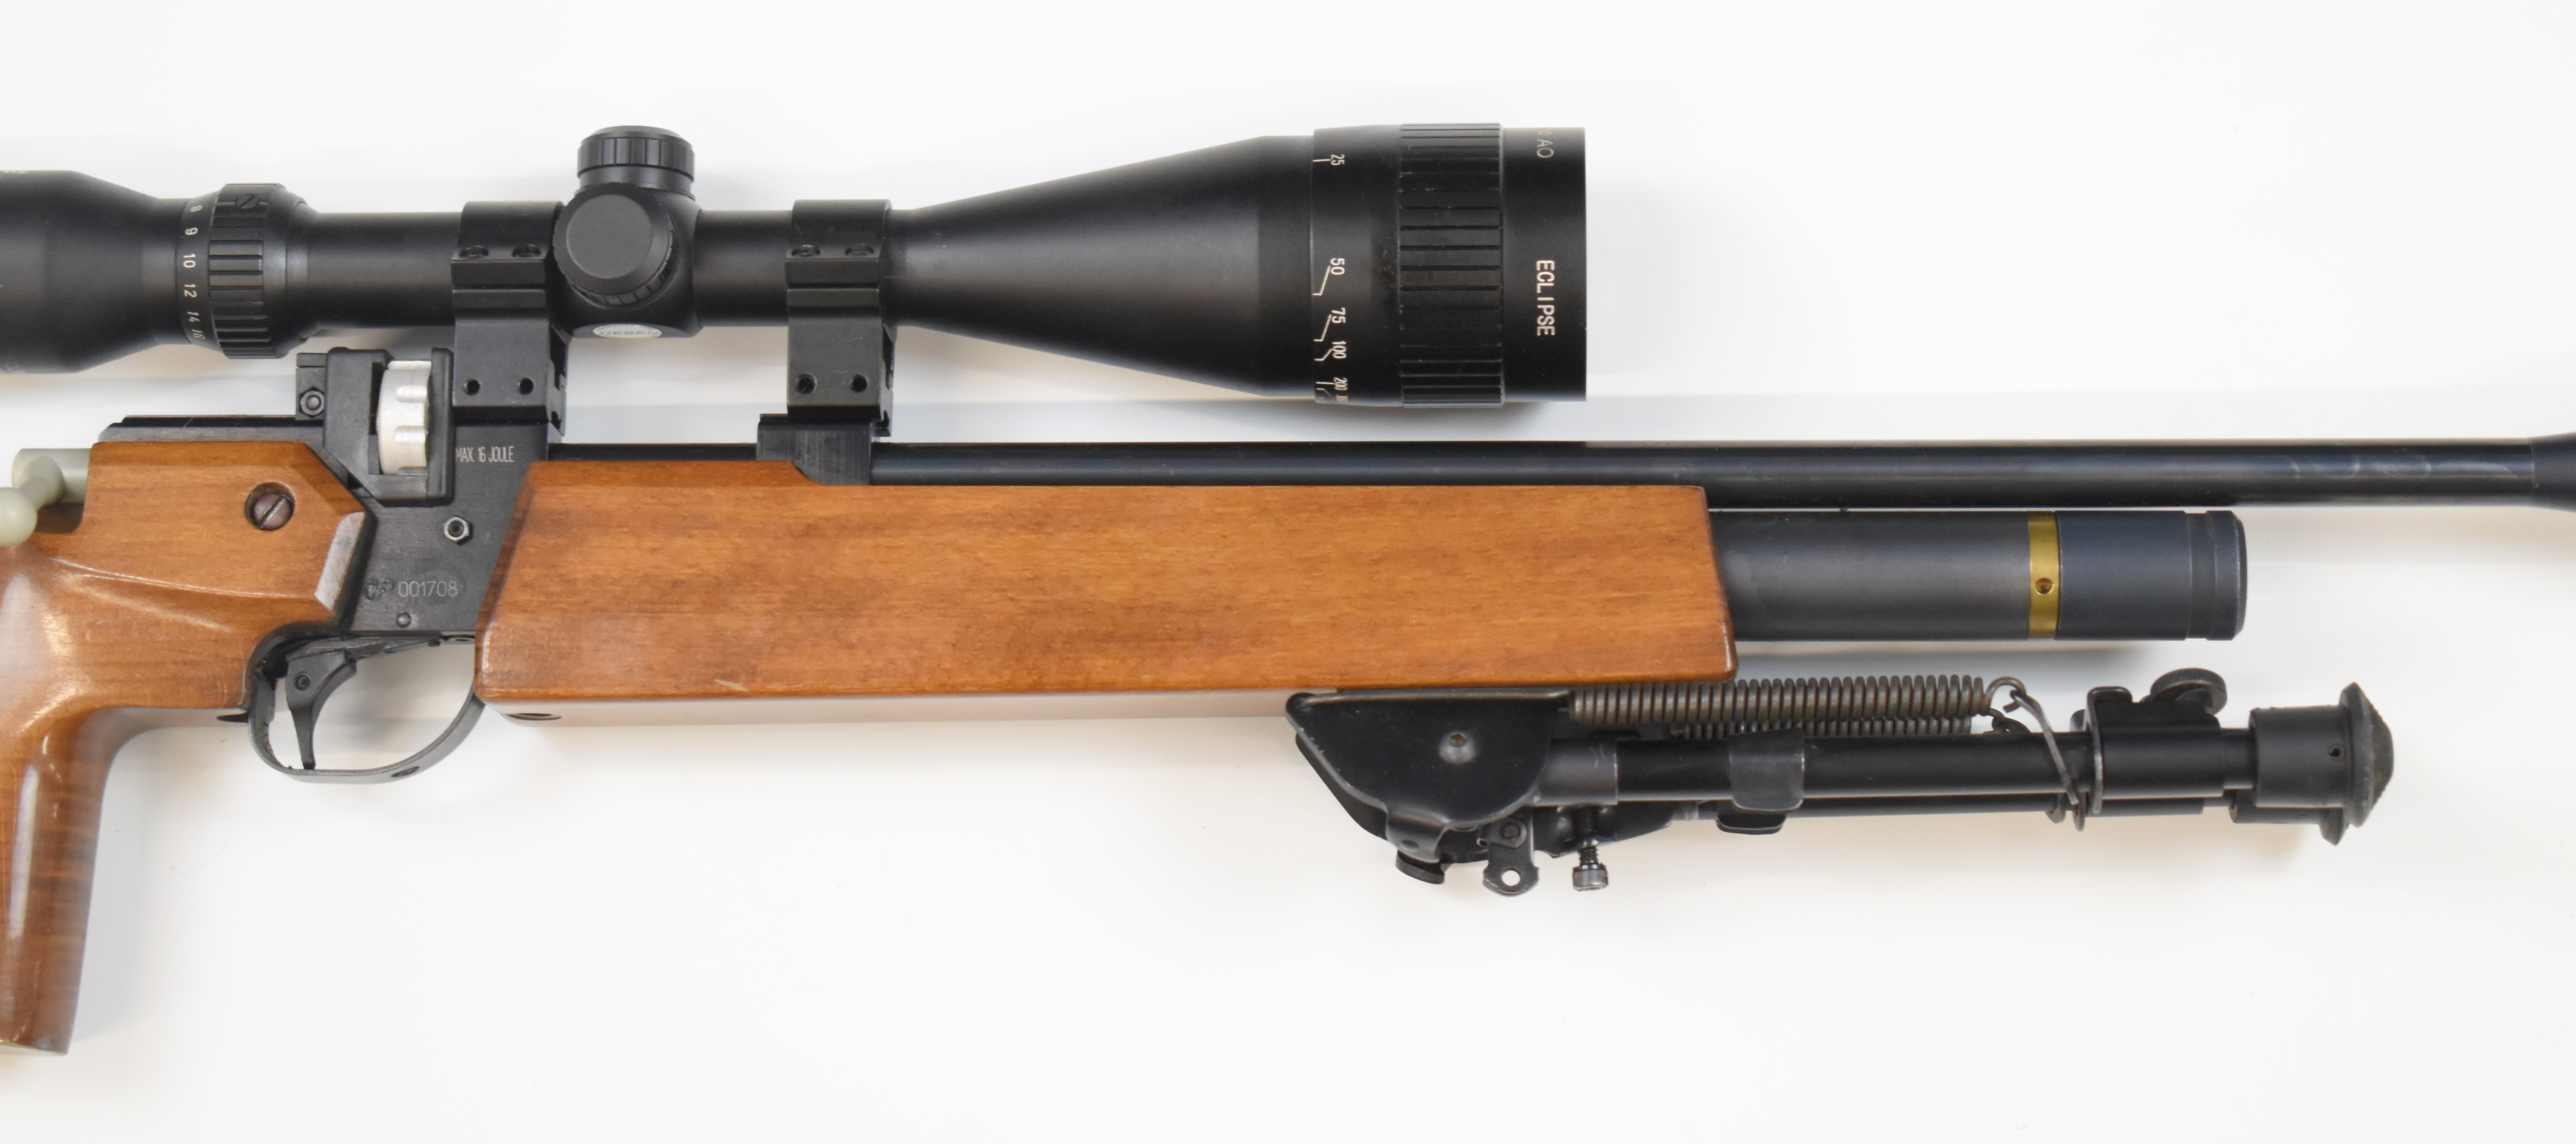 Air Arms S200 .22 PCP air rifle with 10-shot magazine, sound moderator, bi-pod, adjustable trigger - Image 4 of 9